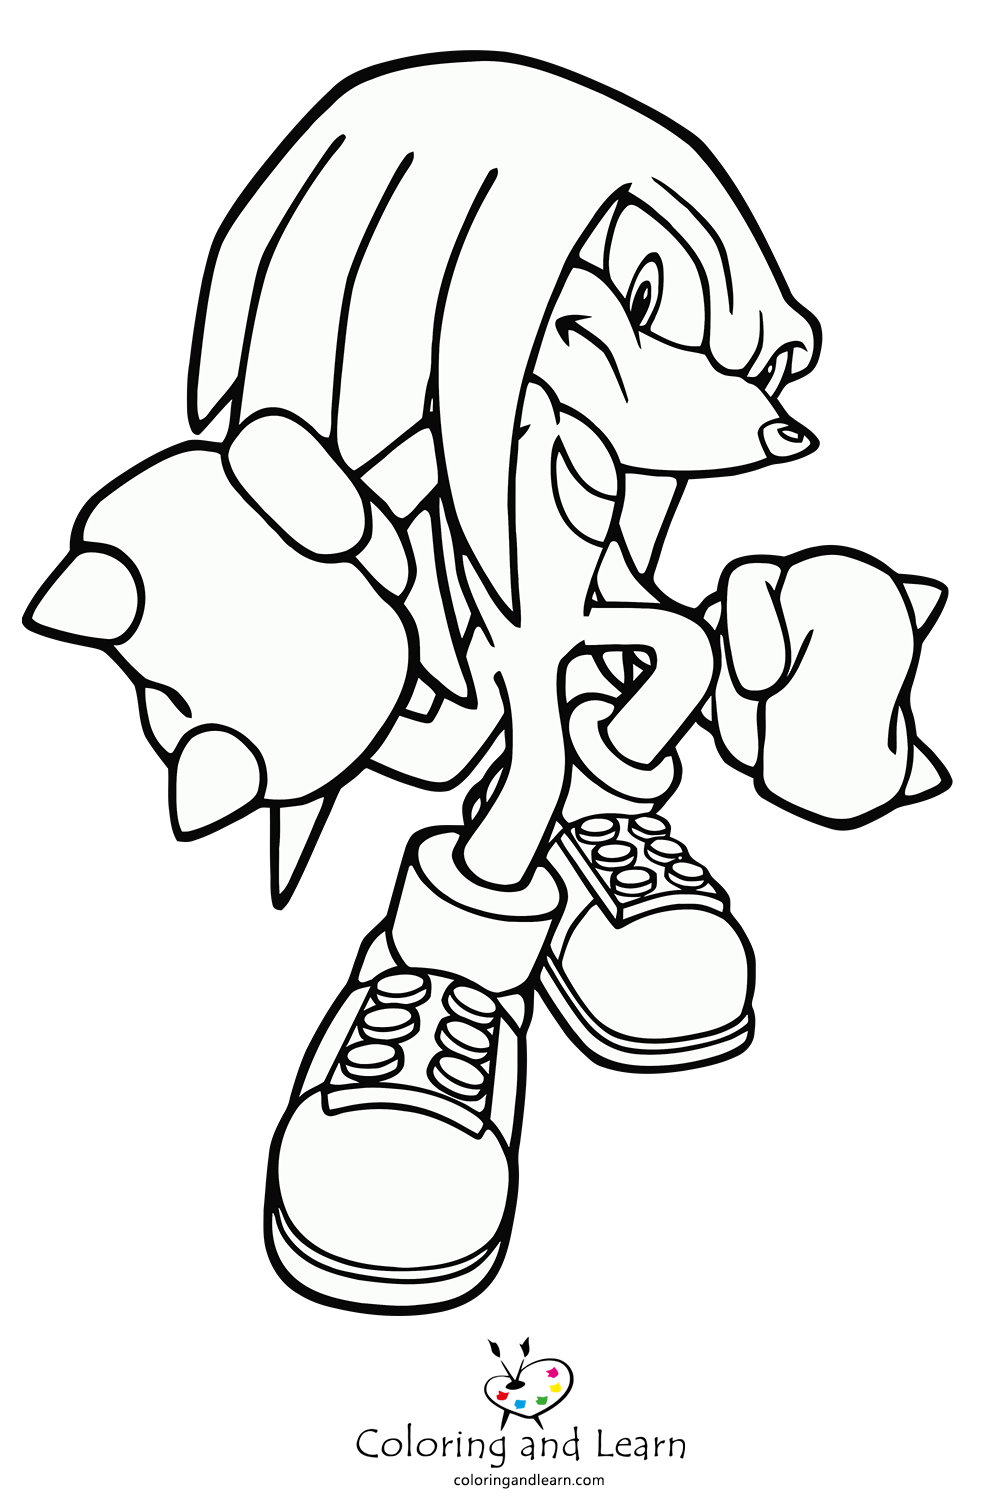 Knuckles coloring pages rcoloringpages